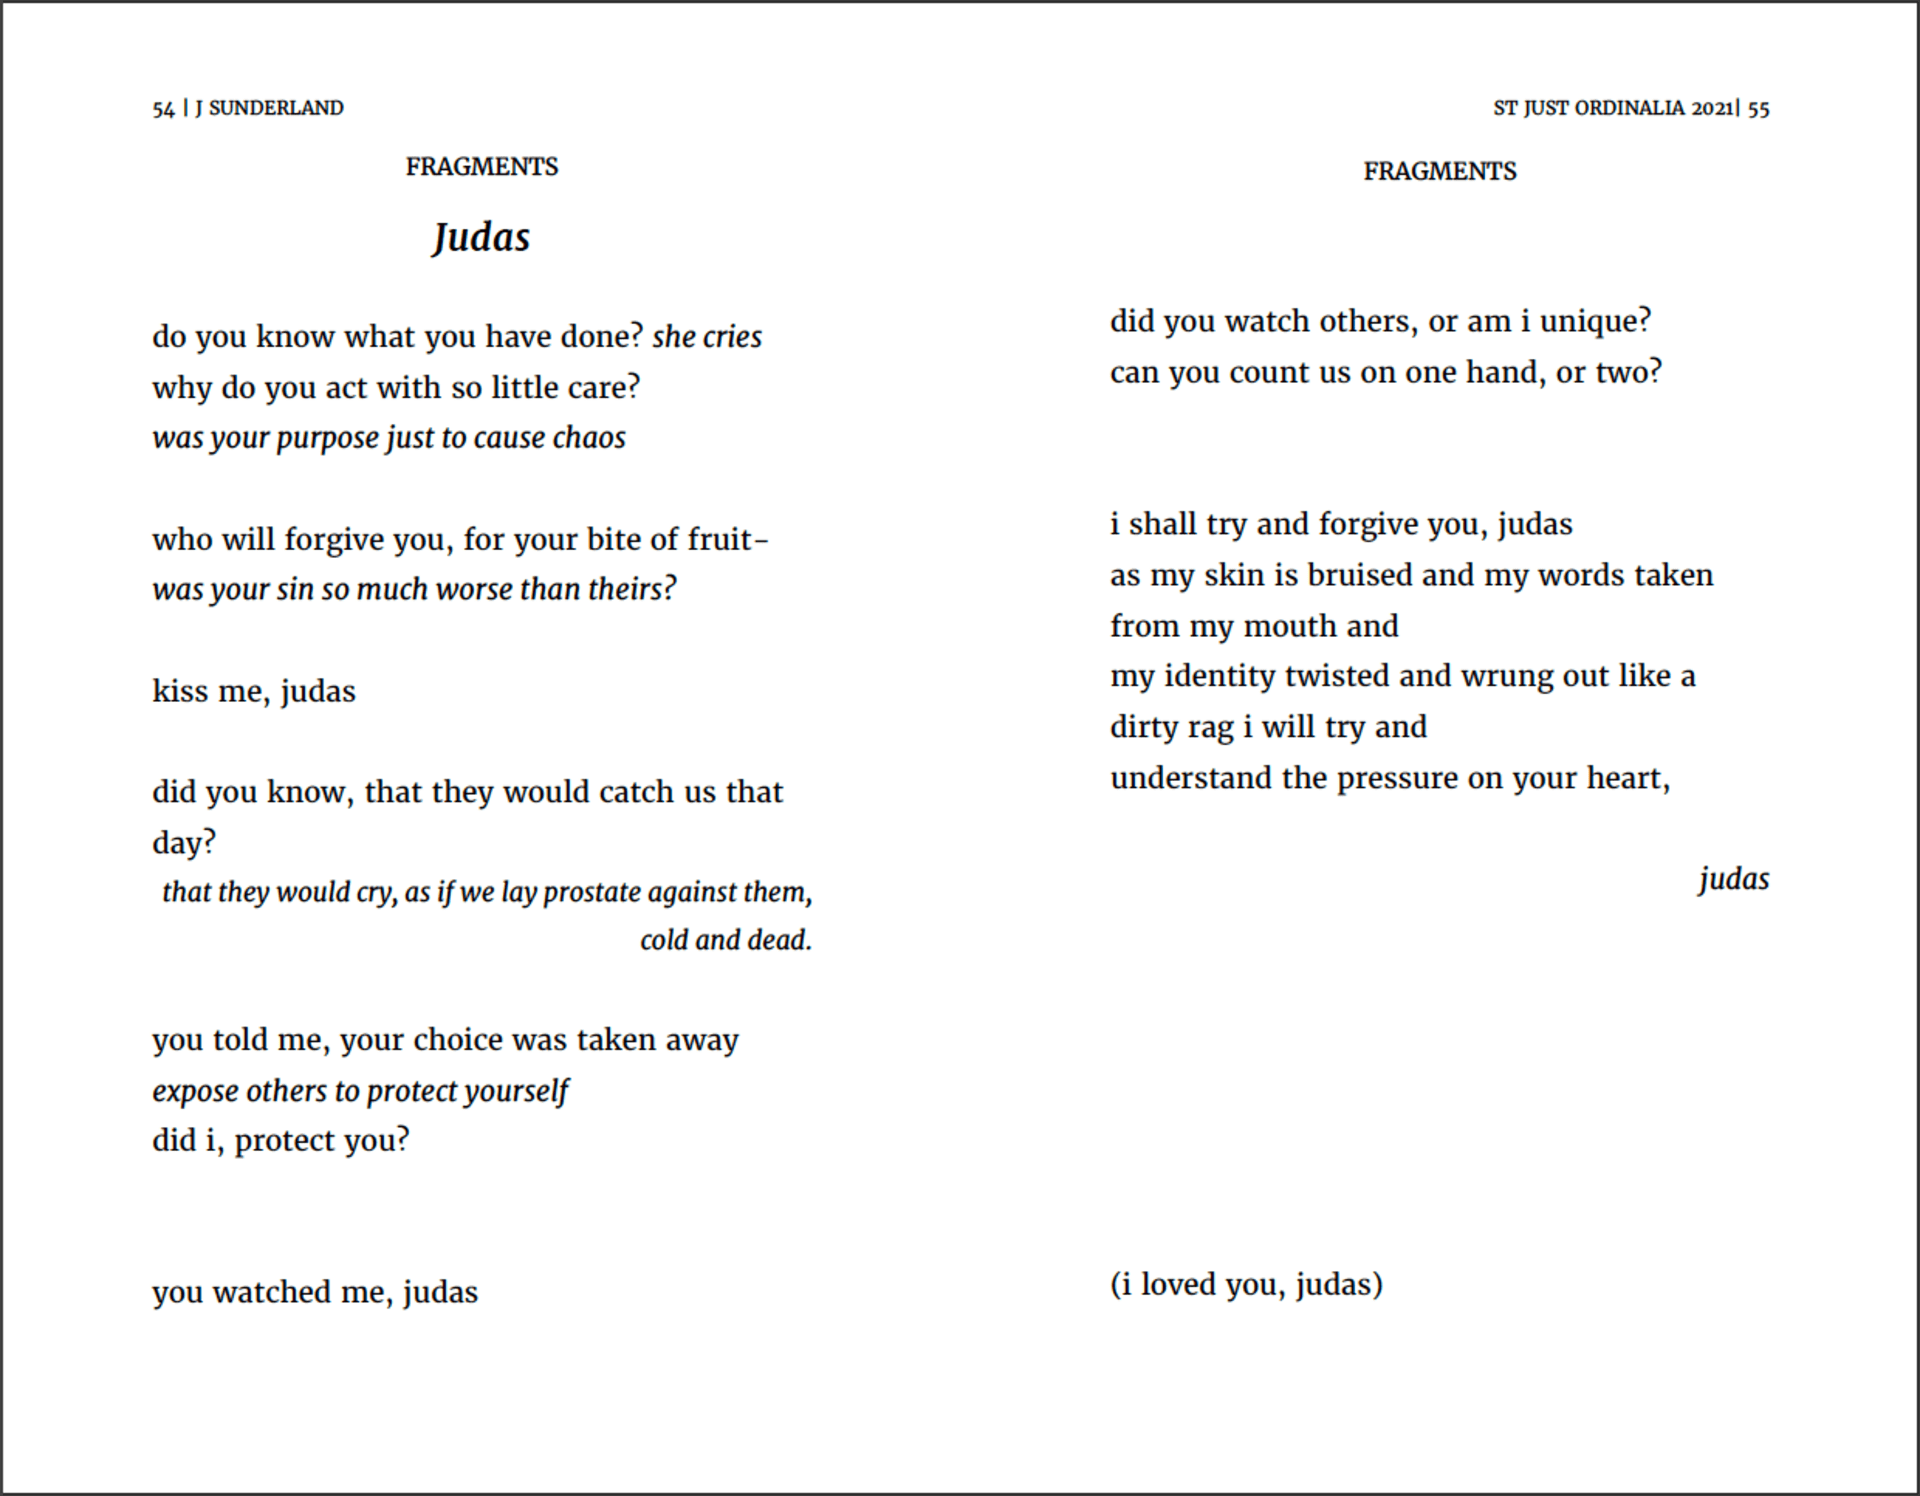 Image of a poem, titled 'Judas' in black text on white background, spread over two columns.